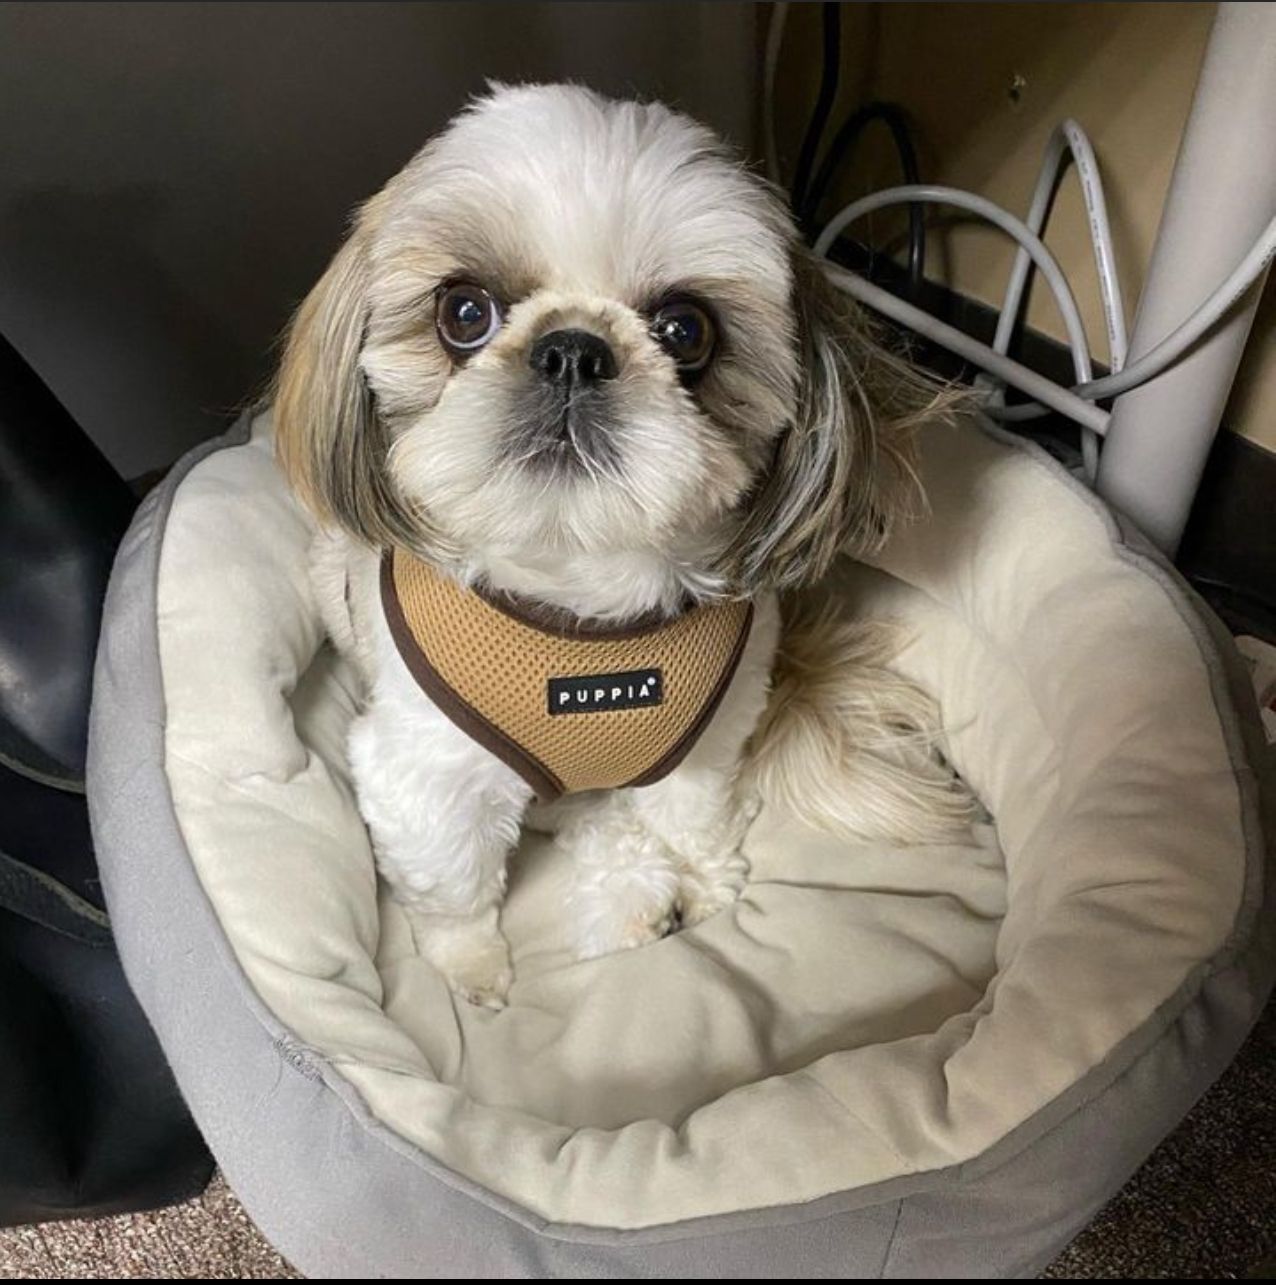 a small dog wearing a puppy harness sits in a dog bed